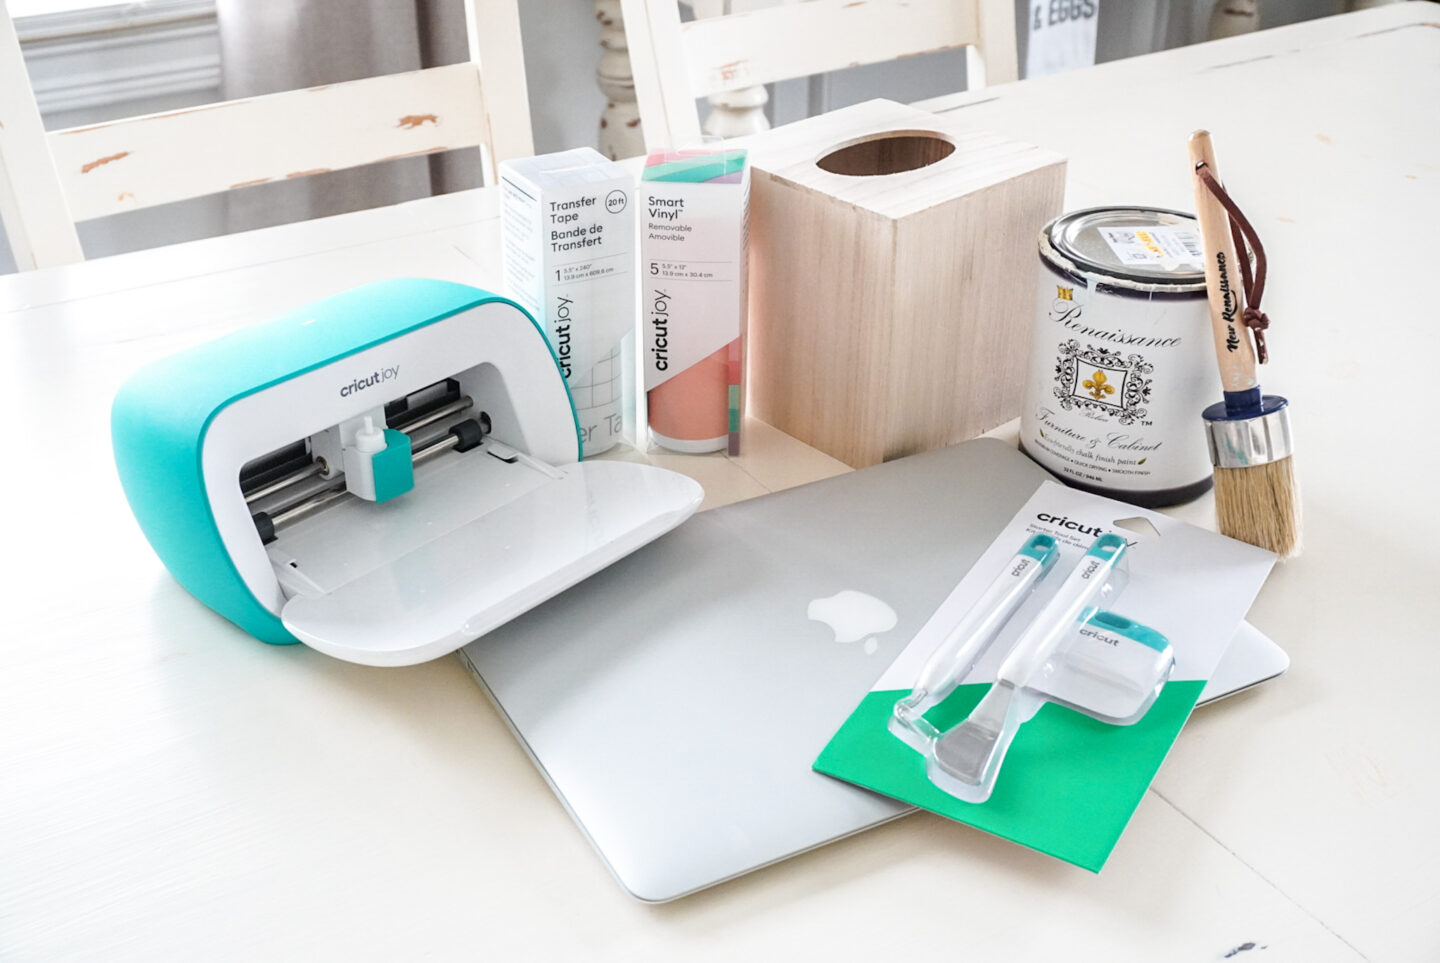 Cricut Joy: Here's everything you need to know